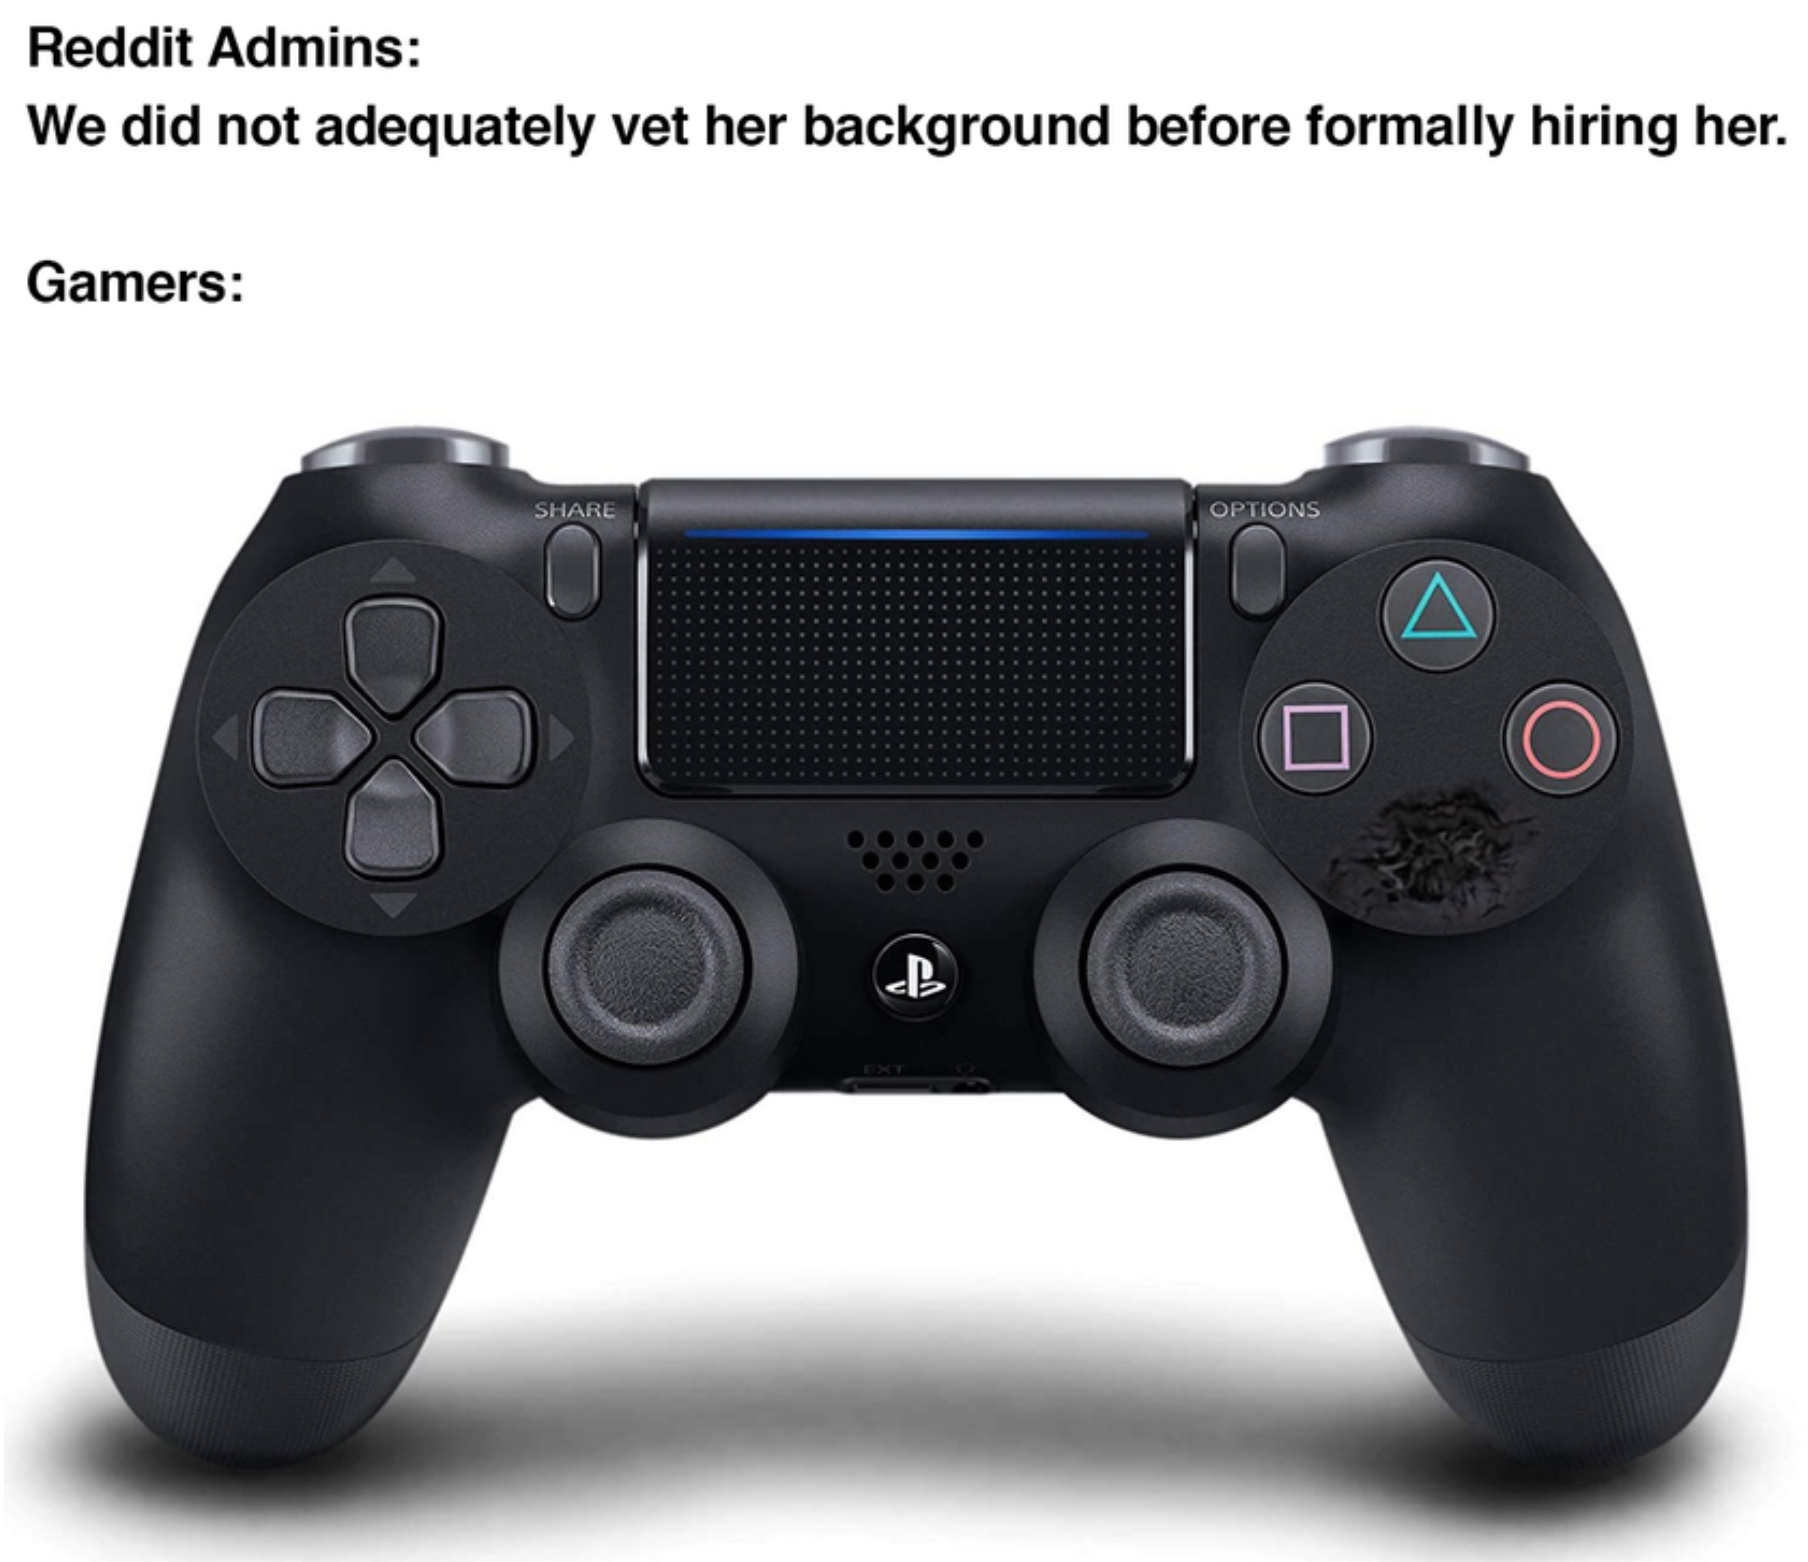 funny gaming memes - ps controller pc - Reddit Admins We did not adequately vet her background before formally hiring her. Gamers Op Lions